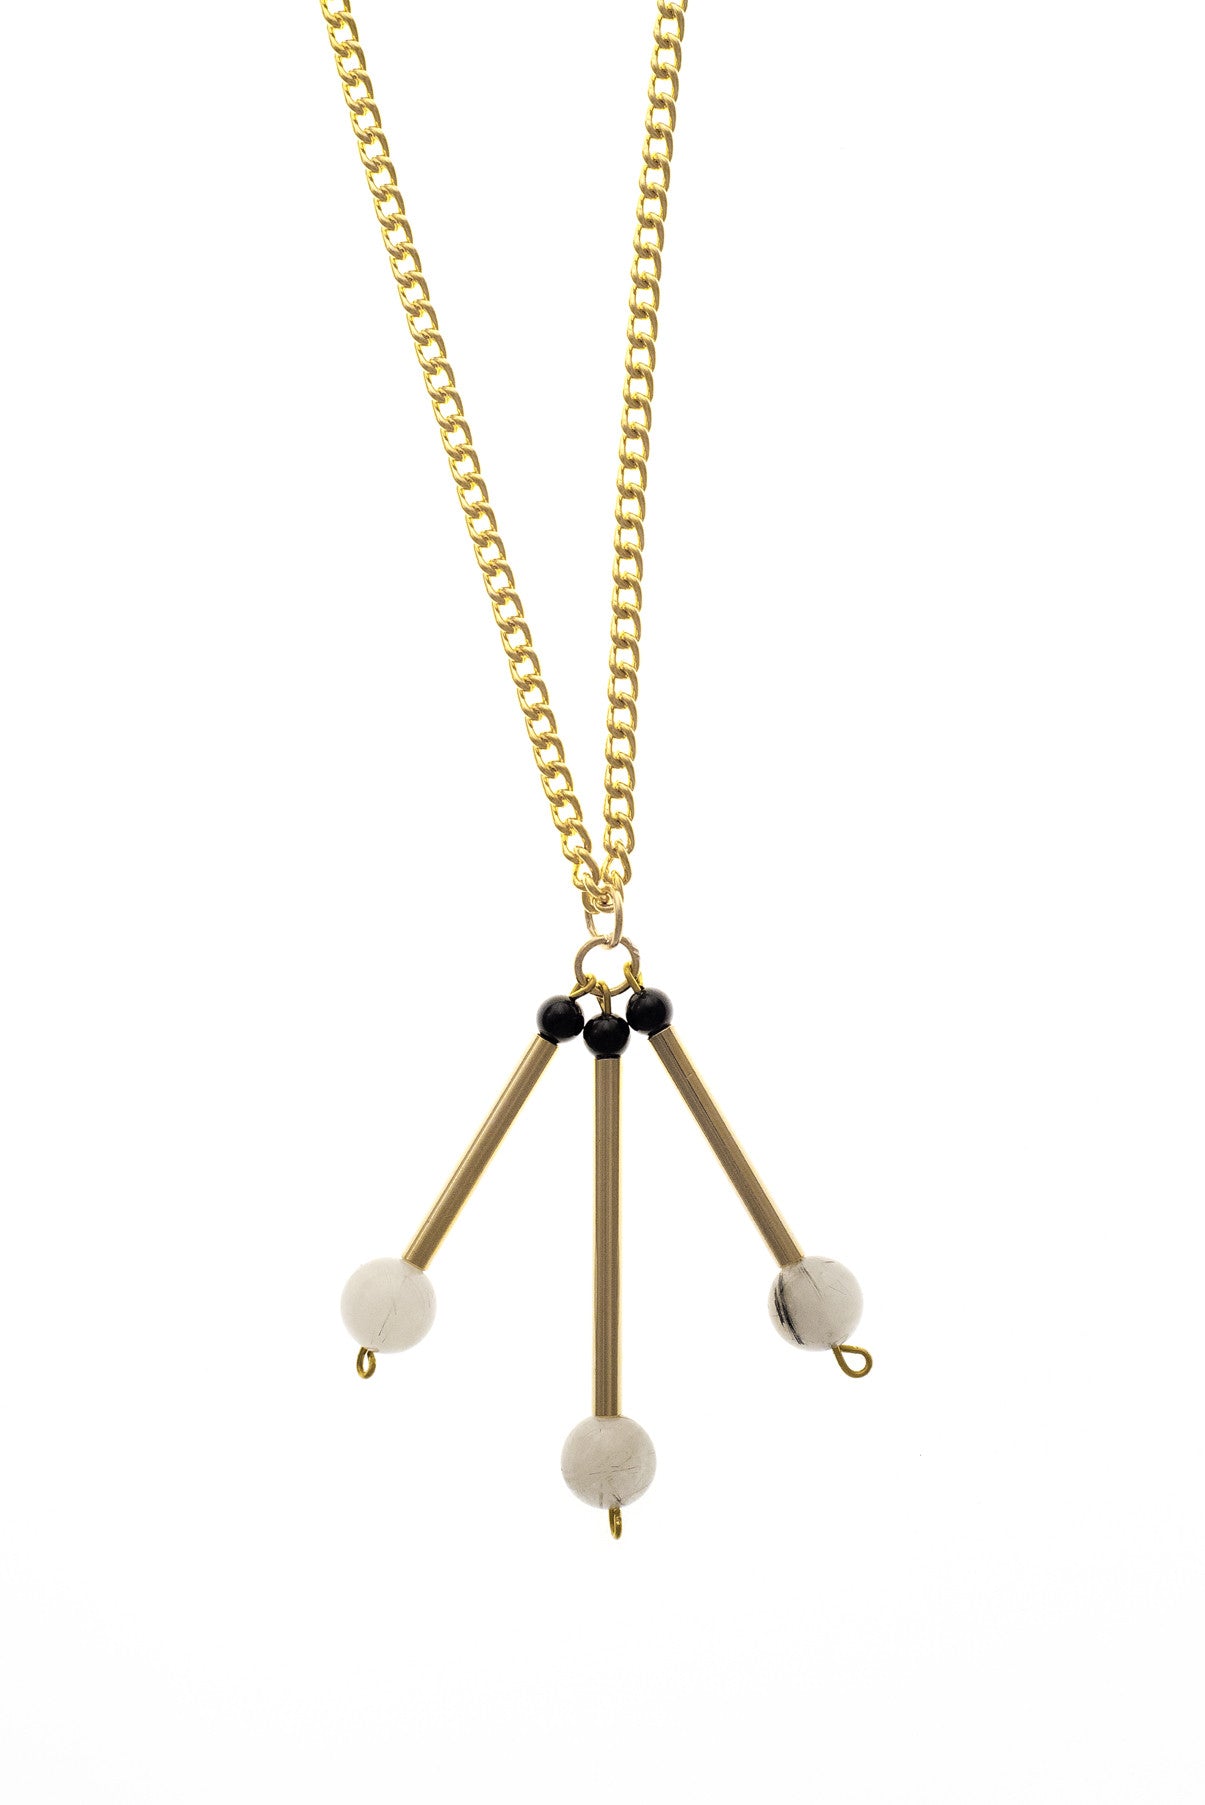 The Elsa necklace is composed of beautiful rutilated quartz, onyx beads and hand-cut and galvanized brass.